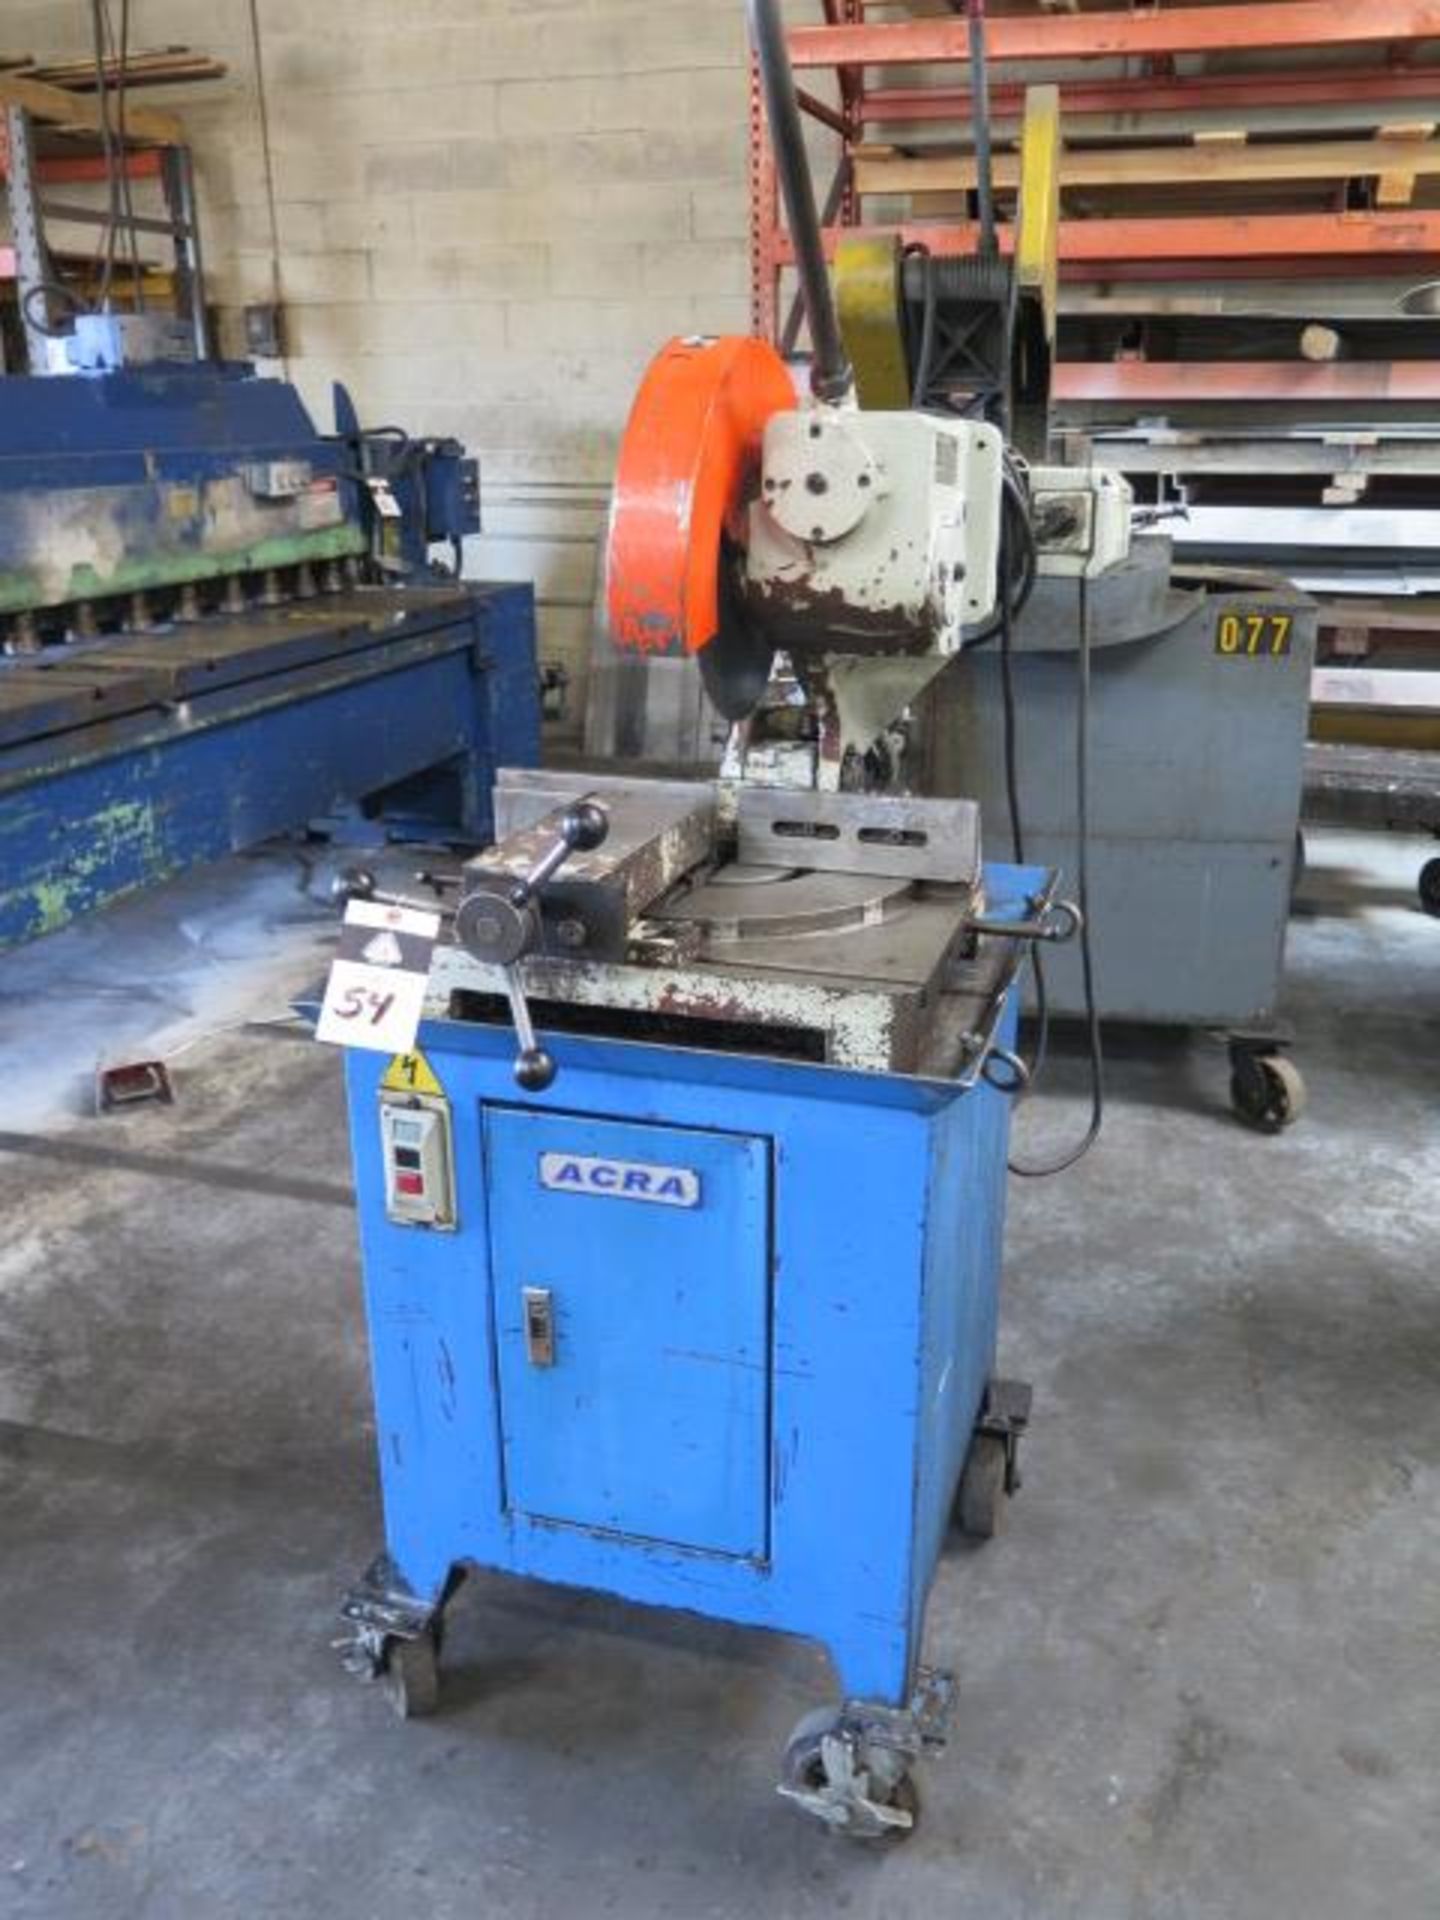 Acra FHC-370T Miter Cold Saw s/n 371647 w/ 2-Speeds, Manual Clamping (AS-IS NO WARRANTY)